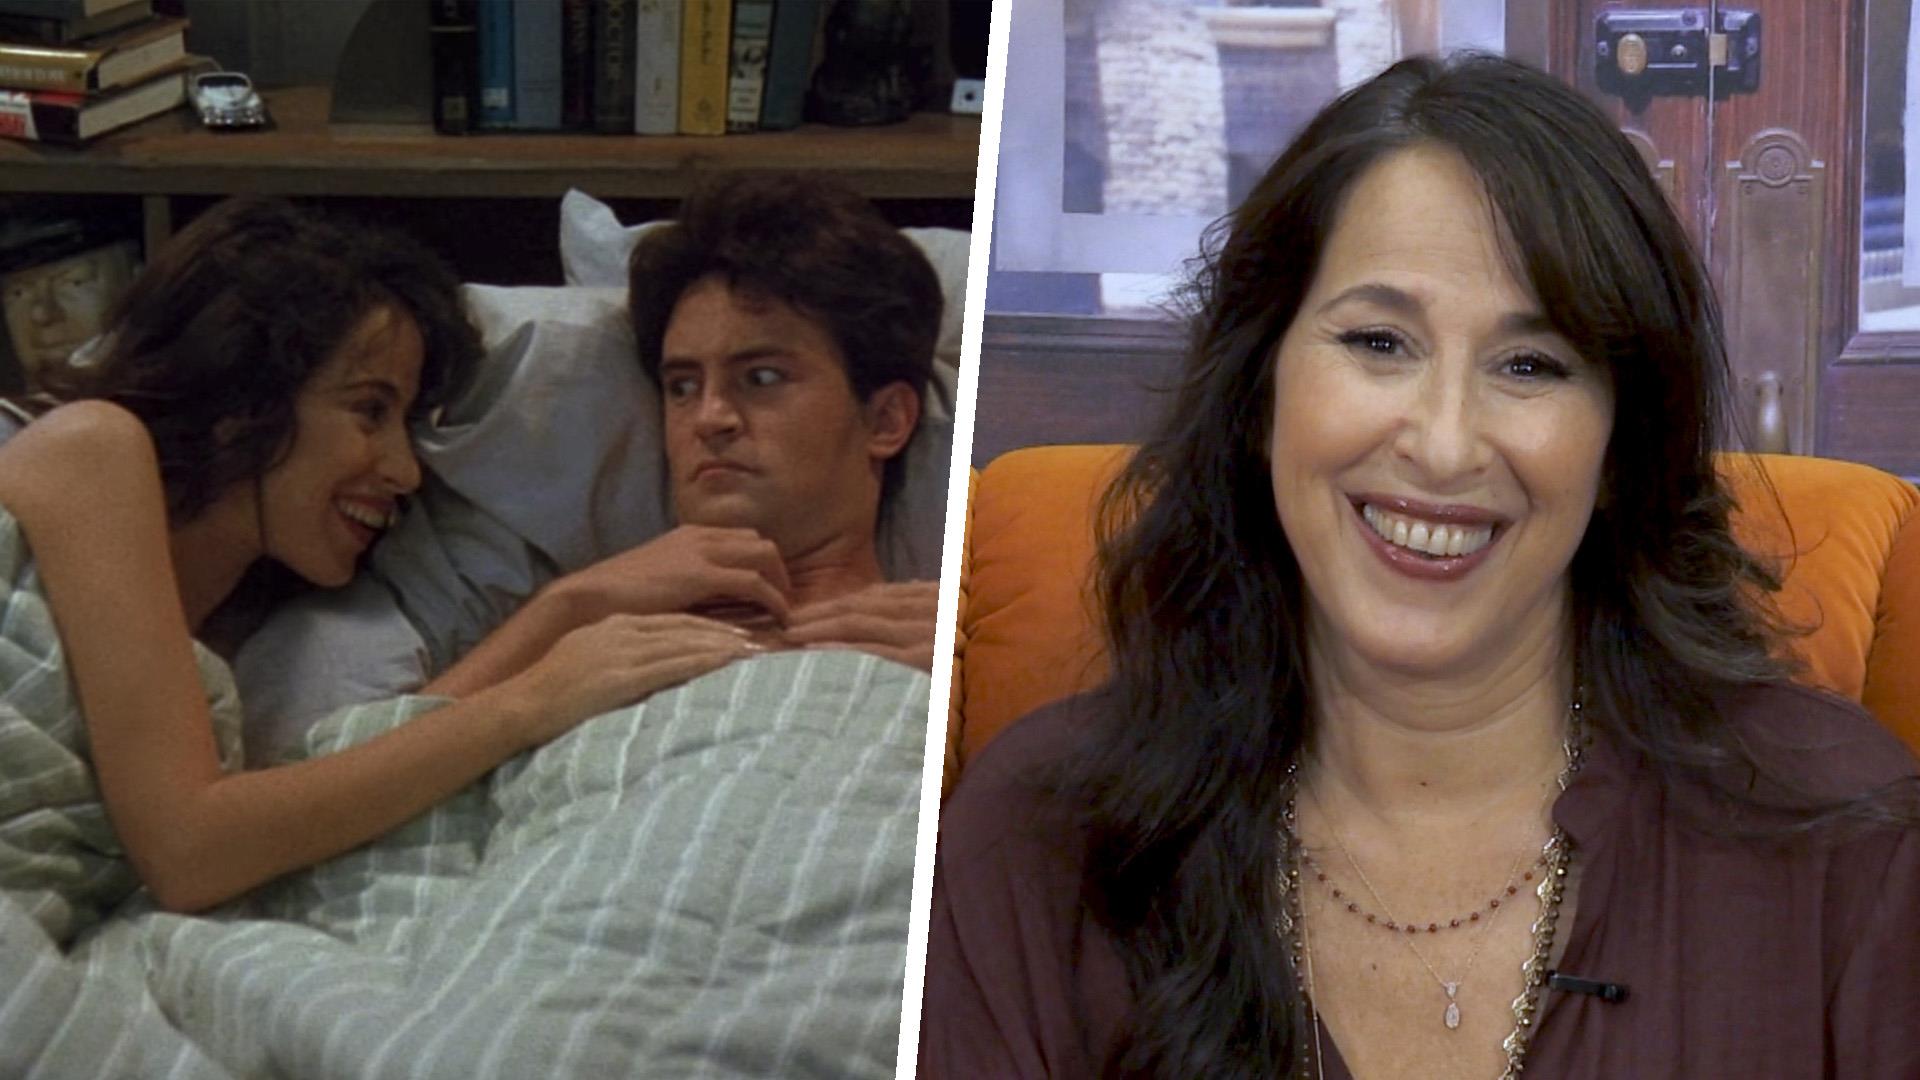 Maggie Wheeler, who played Janice on “Friends